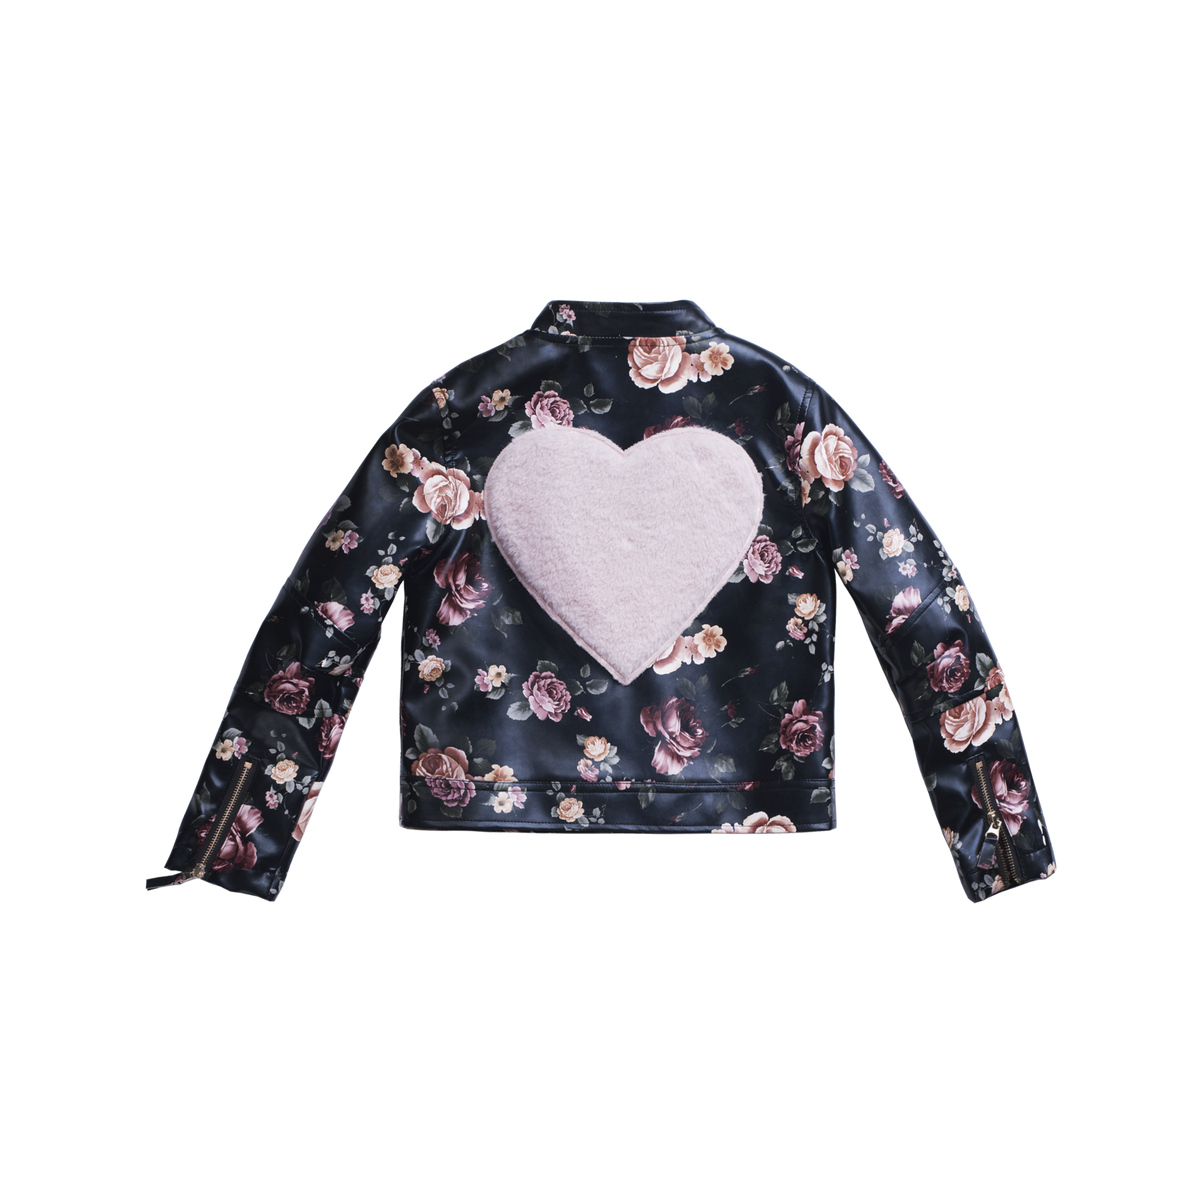 Girls faux leather jacket with pink flowers designed all over and a faux fur pink heart shaped patch on the back, by Imoga.